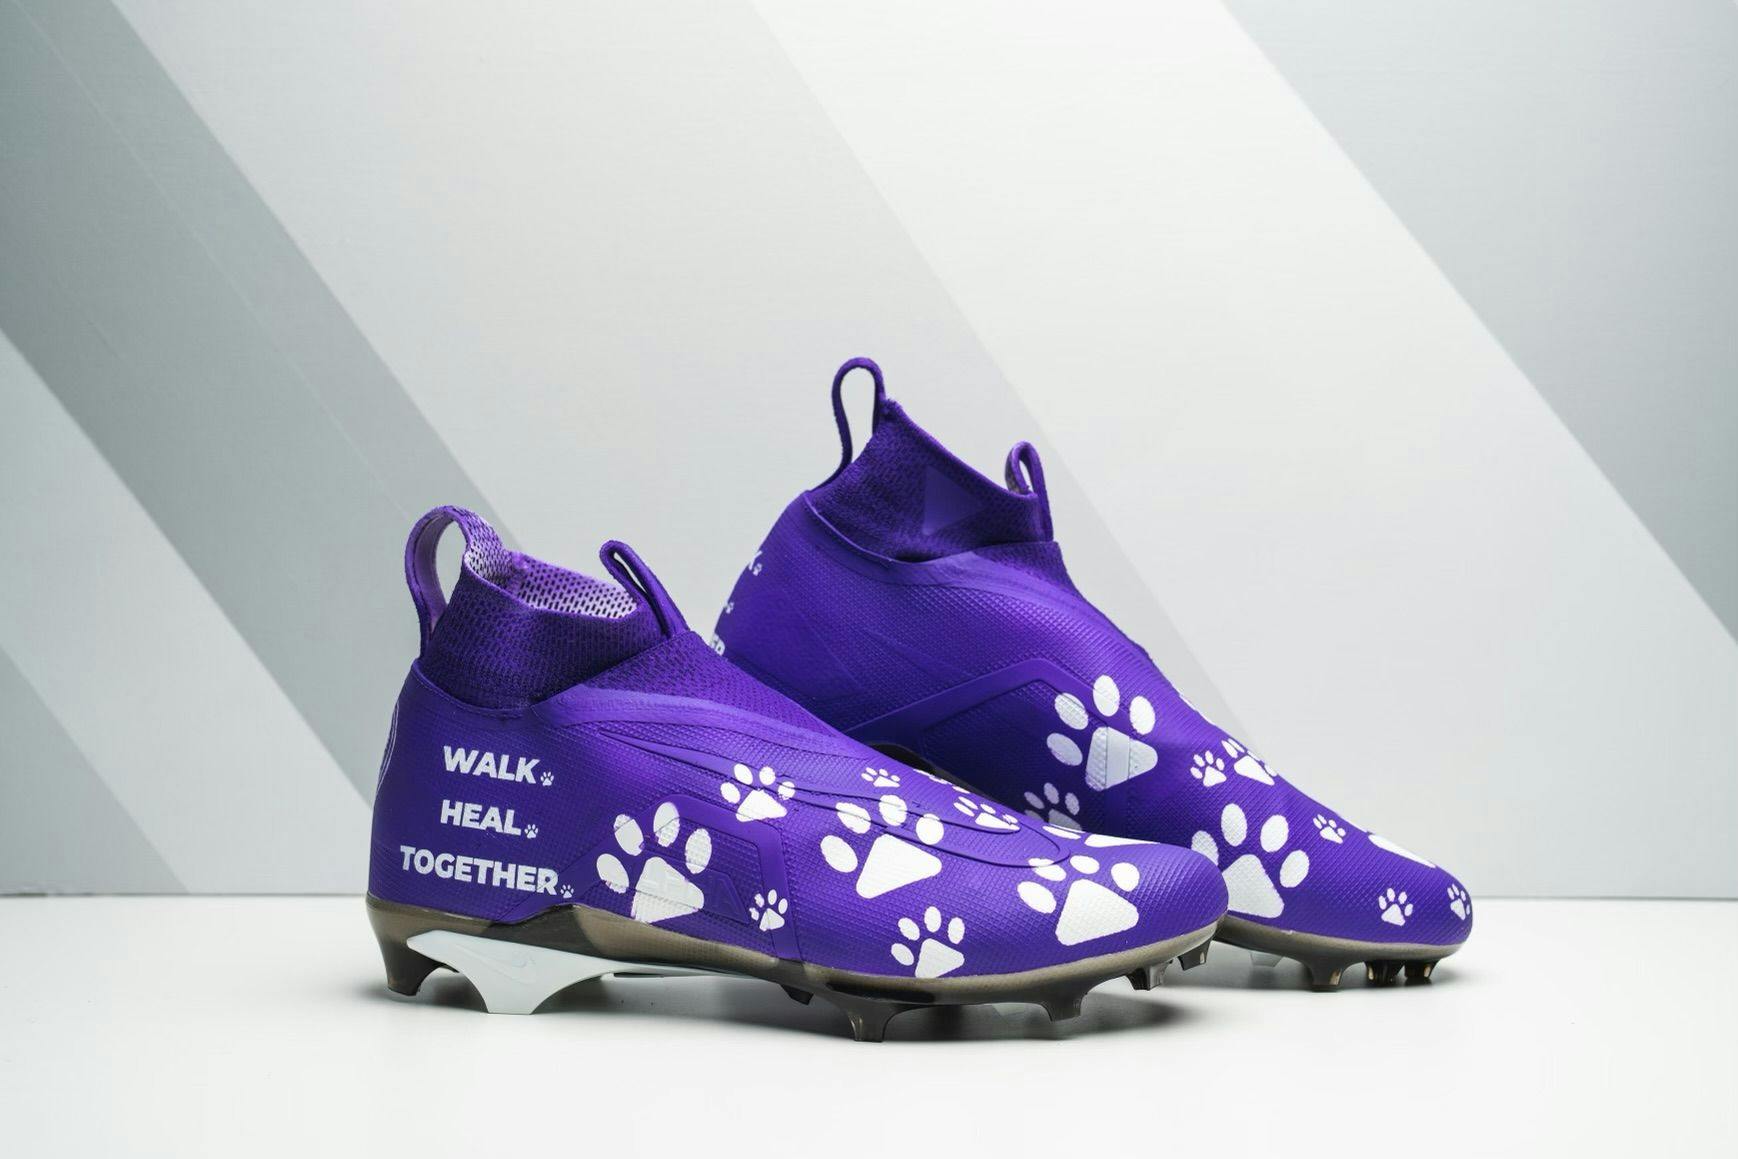 James Smith-Williams custom-designed cleats highlighting the Purple Leash Project